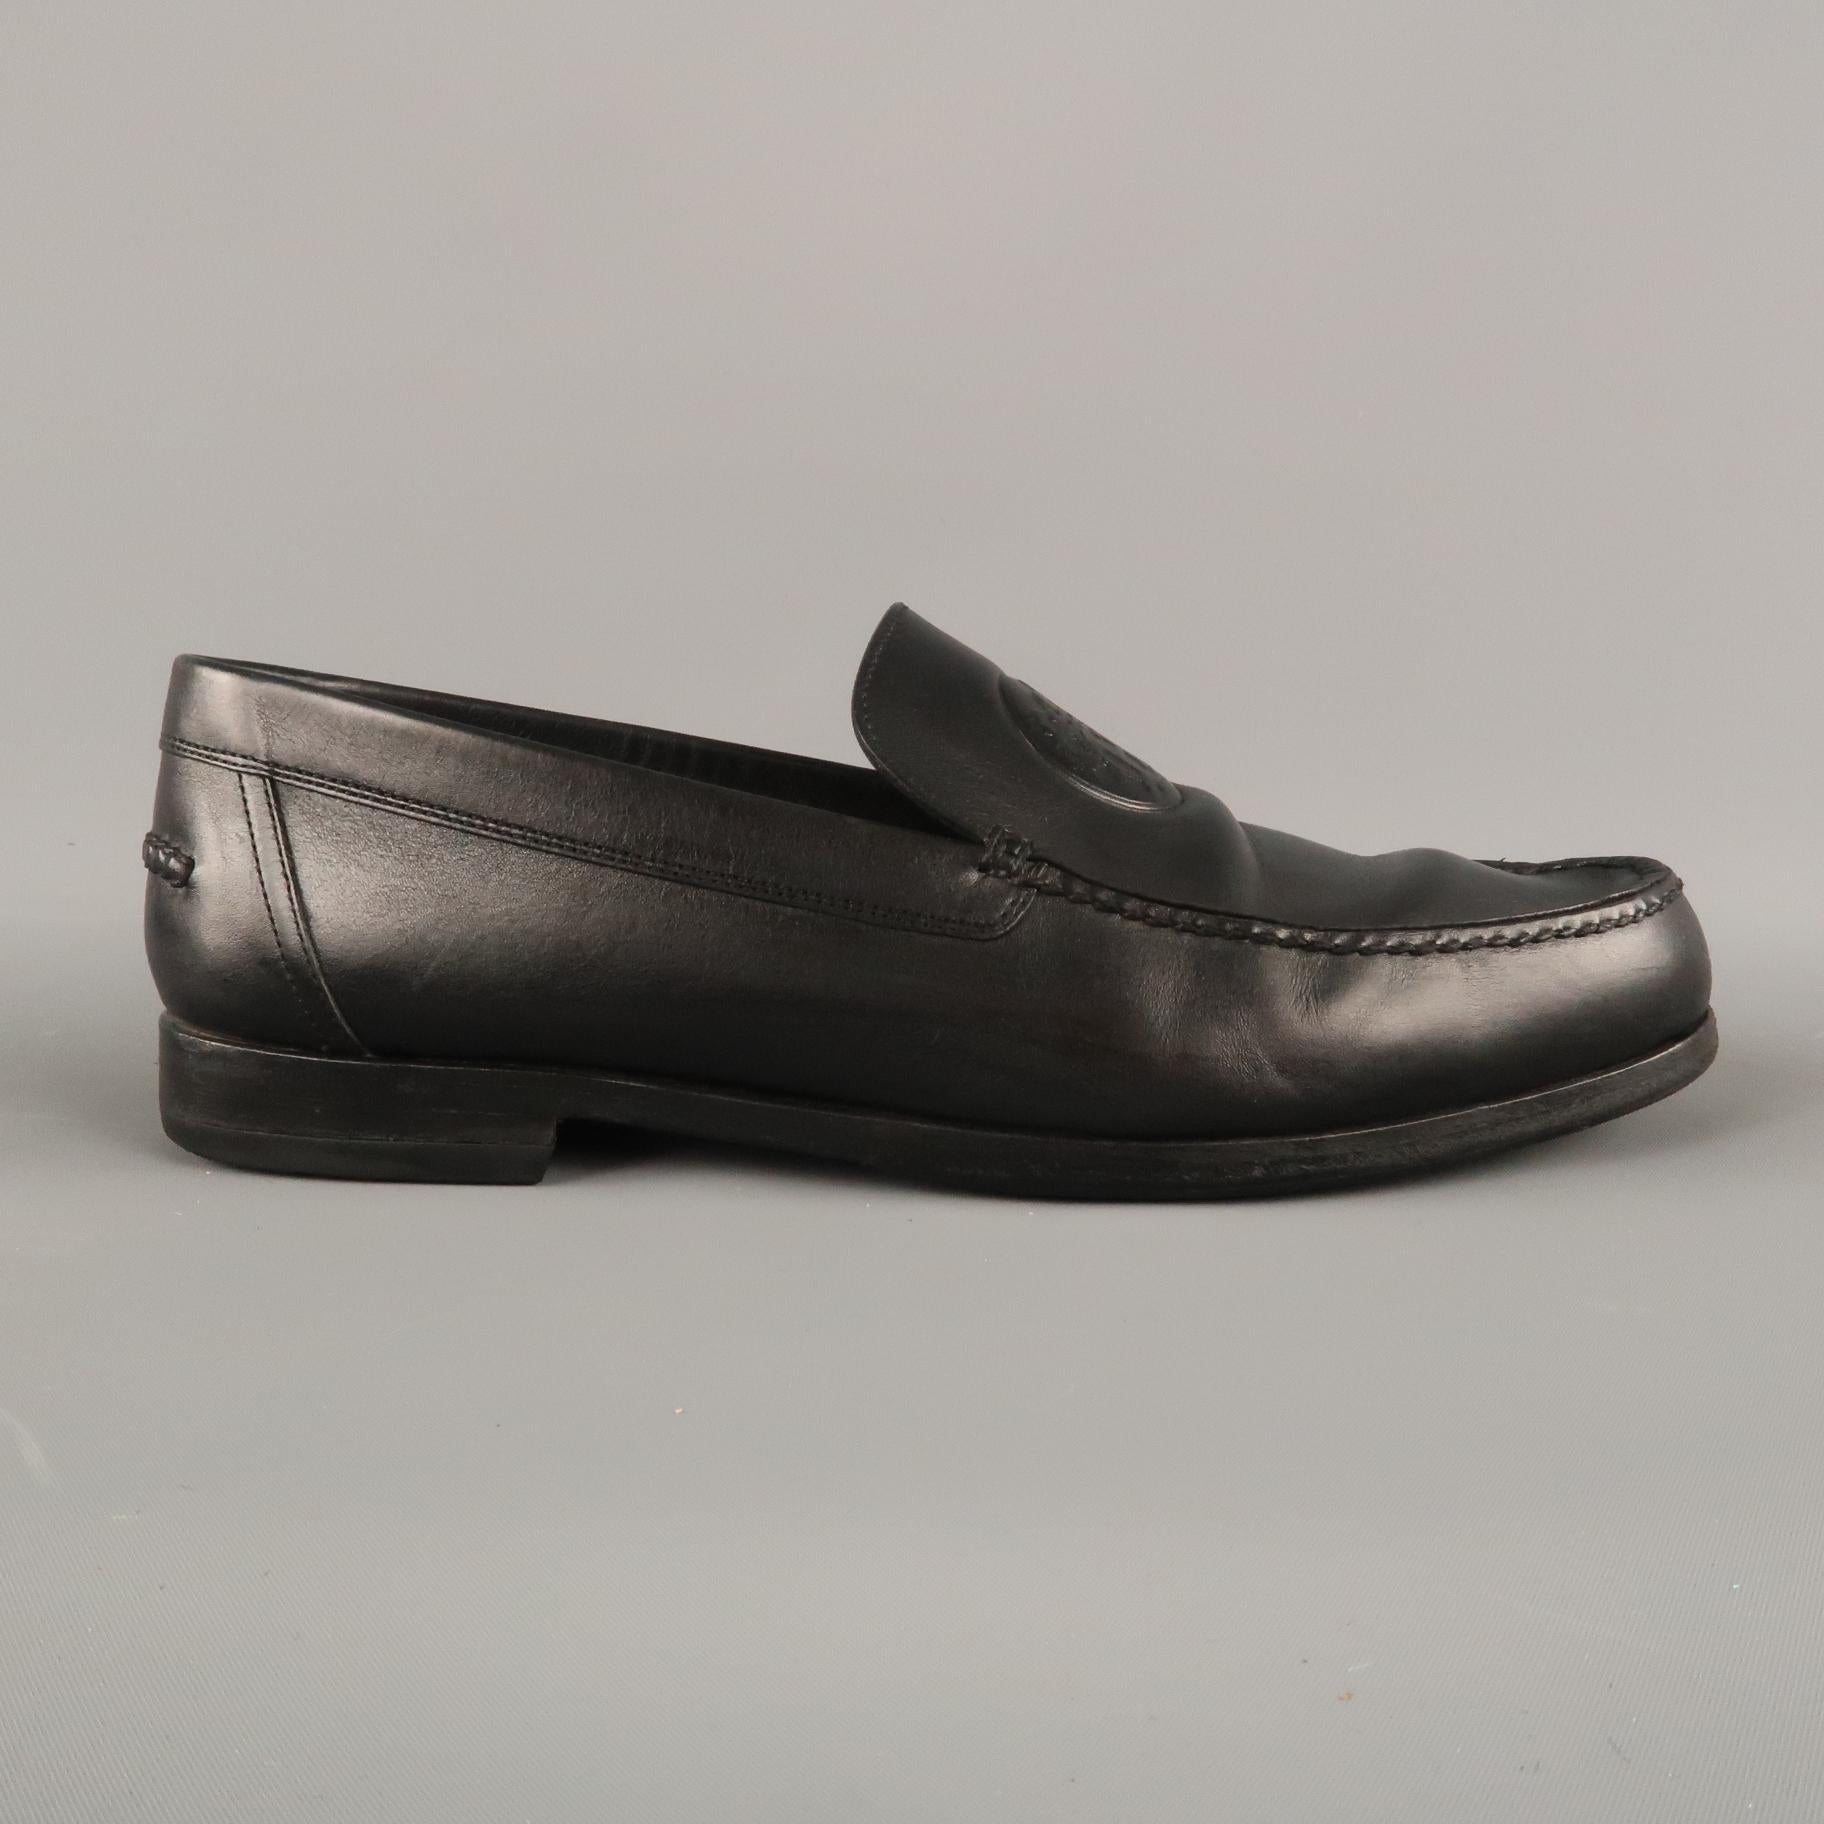 HERMES Slip On Loafers Shoes comes in a black tone in a solid leather material, with an embossed logo apron, resoled. As is. With dust bags. Made in Italy.
 
Very Good Pre-Owned Condition.
Marked: IT 41 1/2
 
Outsole: 11.5 x 4 in.